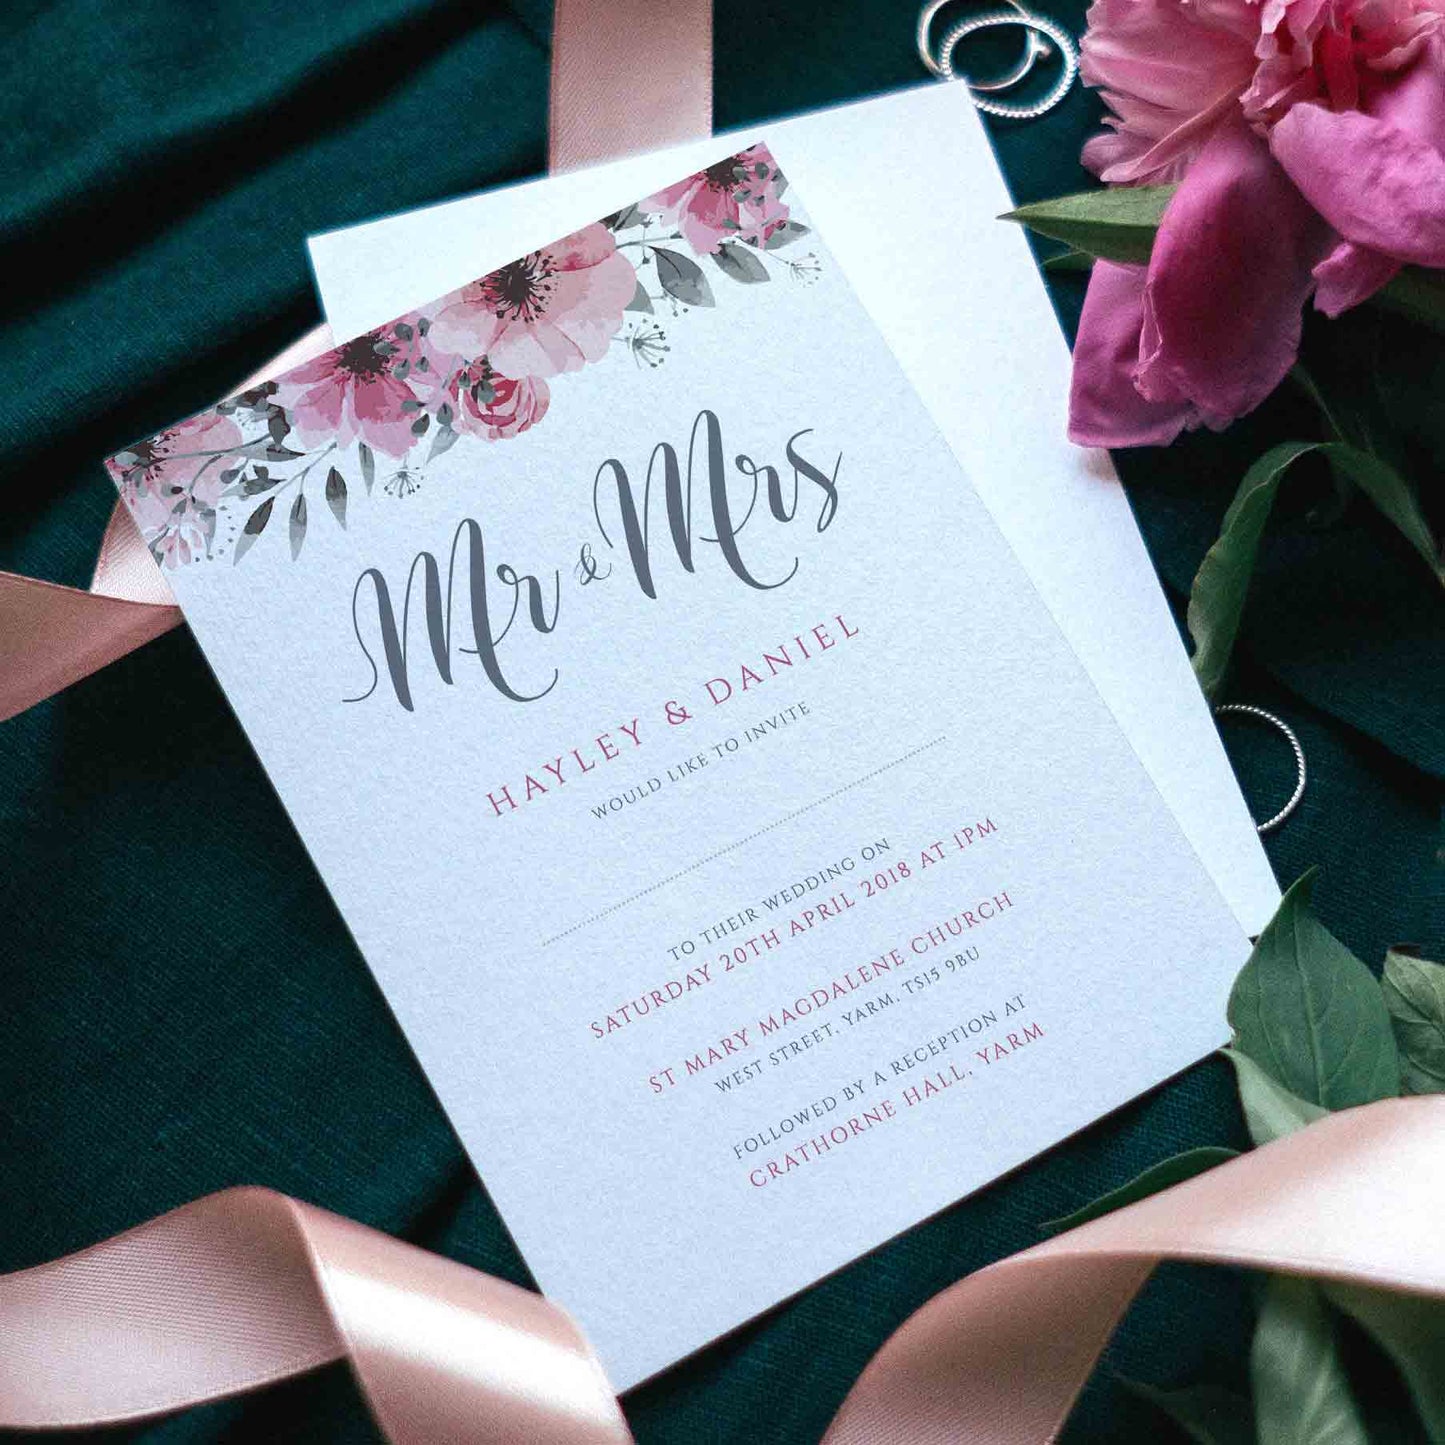 mr and mrs floral wedding invitation with flowers, ribbons and wedding rings